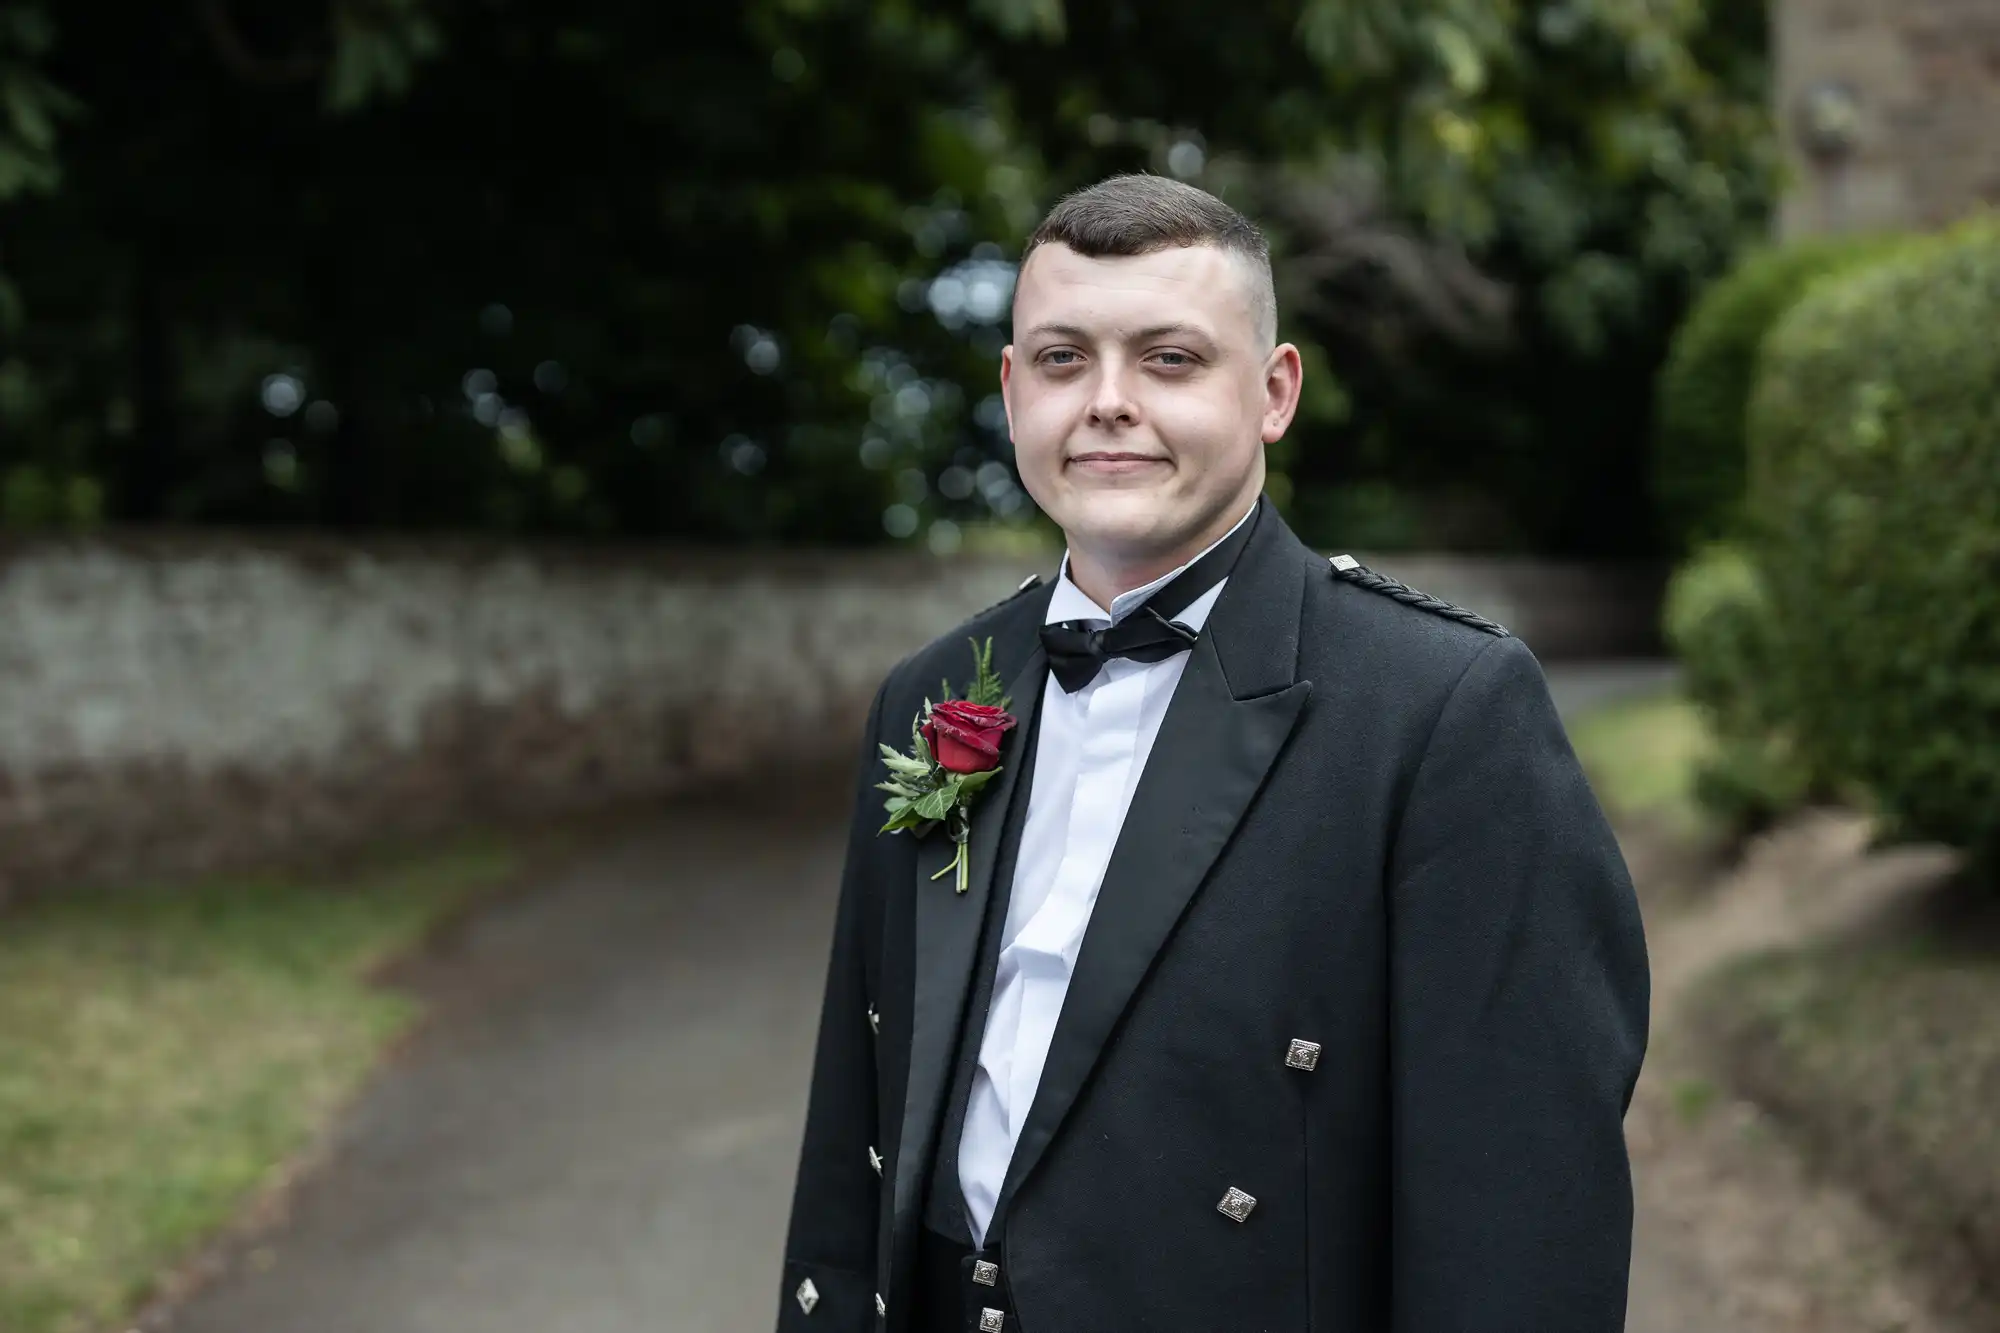 A young man in a tuxedo with a boutonniere smiles subtly, standing on a pathway with greenery in the background.